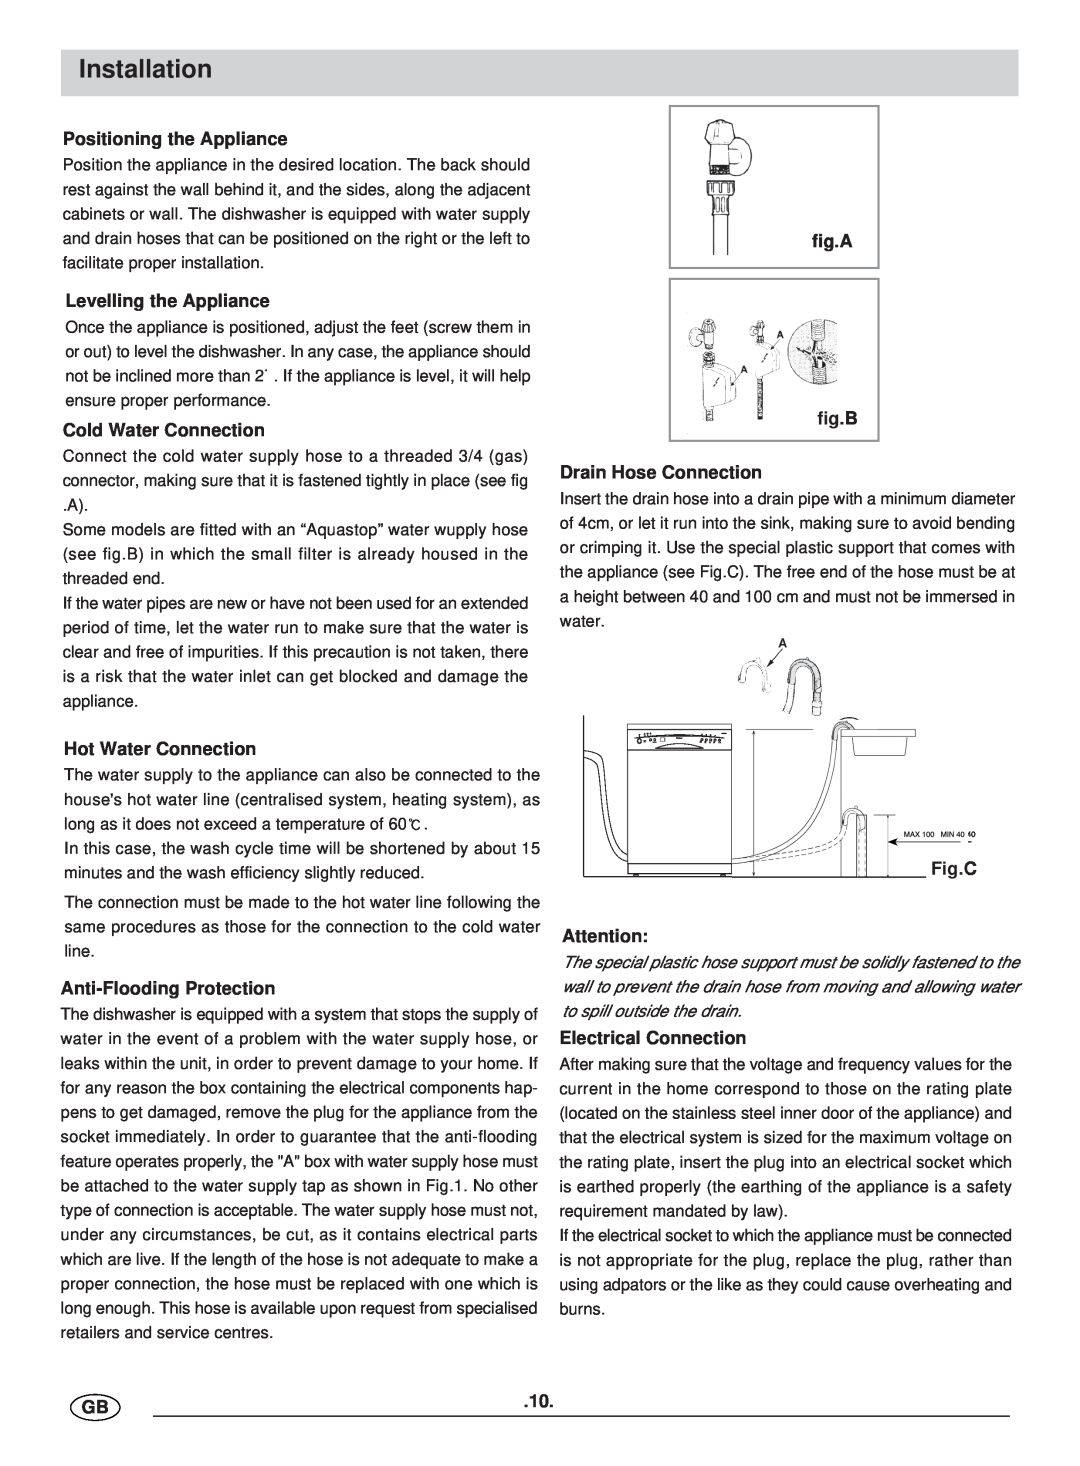 Haier DW12-BFE manual Installation, Positioning the Appliance, Levelling the Appliance, Cold Water Connection, Fig.C 